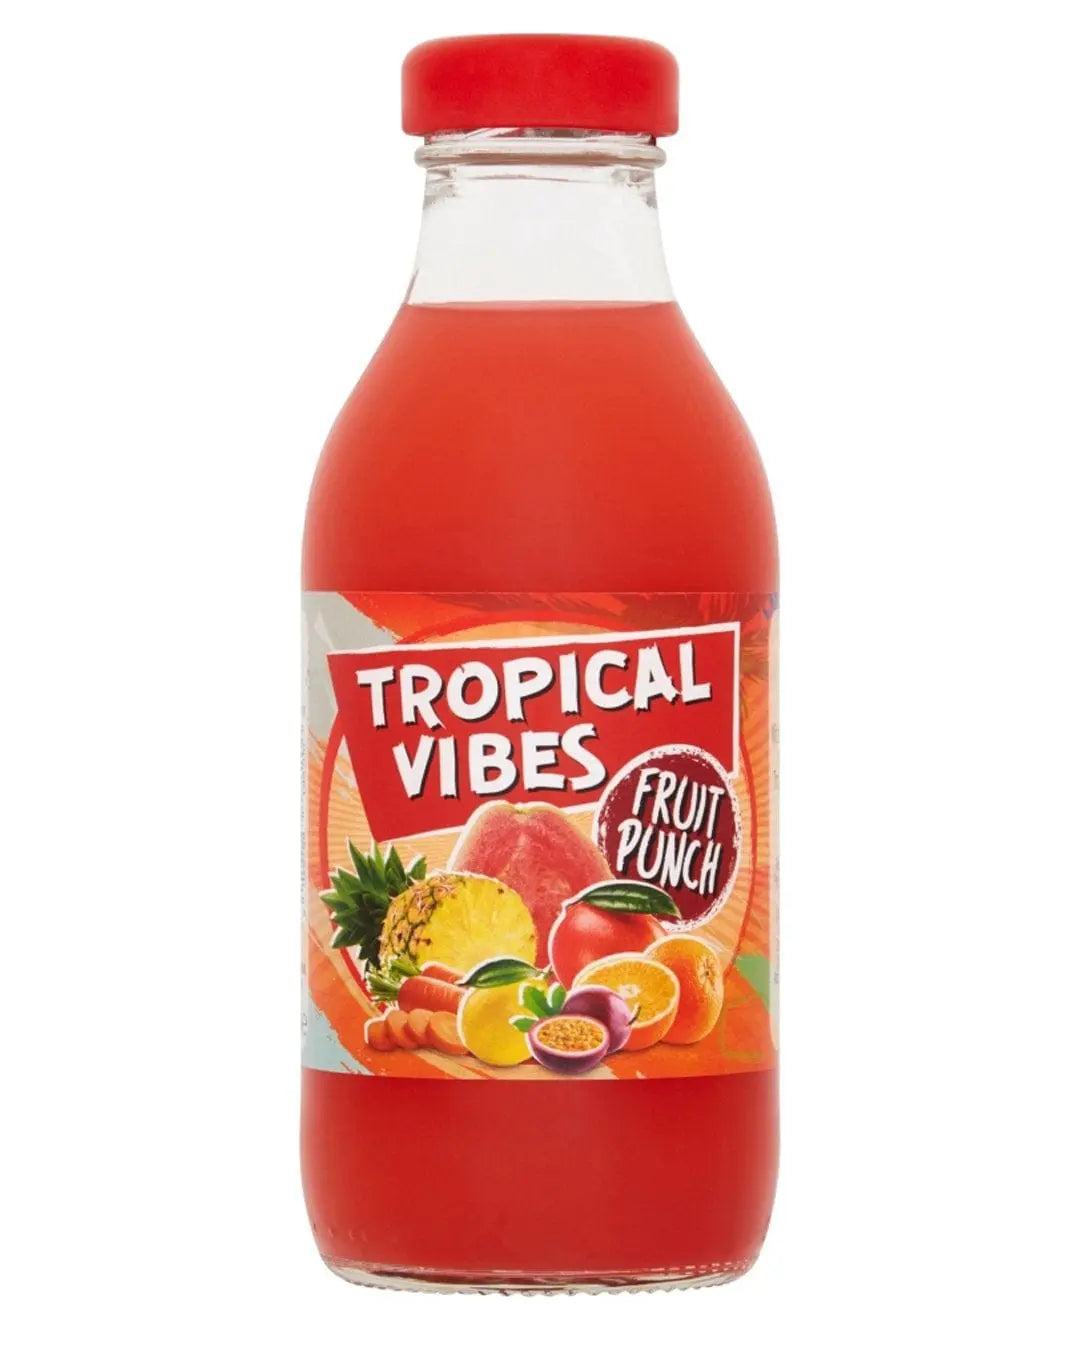 Tropical Vibes Fruit Punch Drink Multipack, 15 x 300 ml Soft Drinks & Mixers